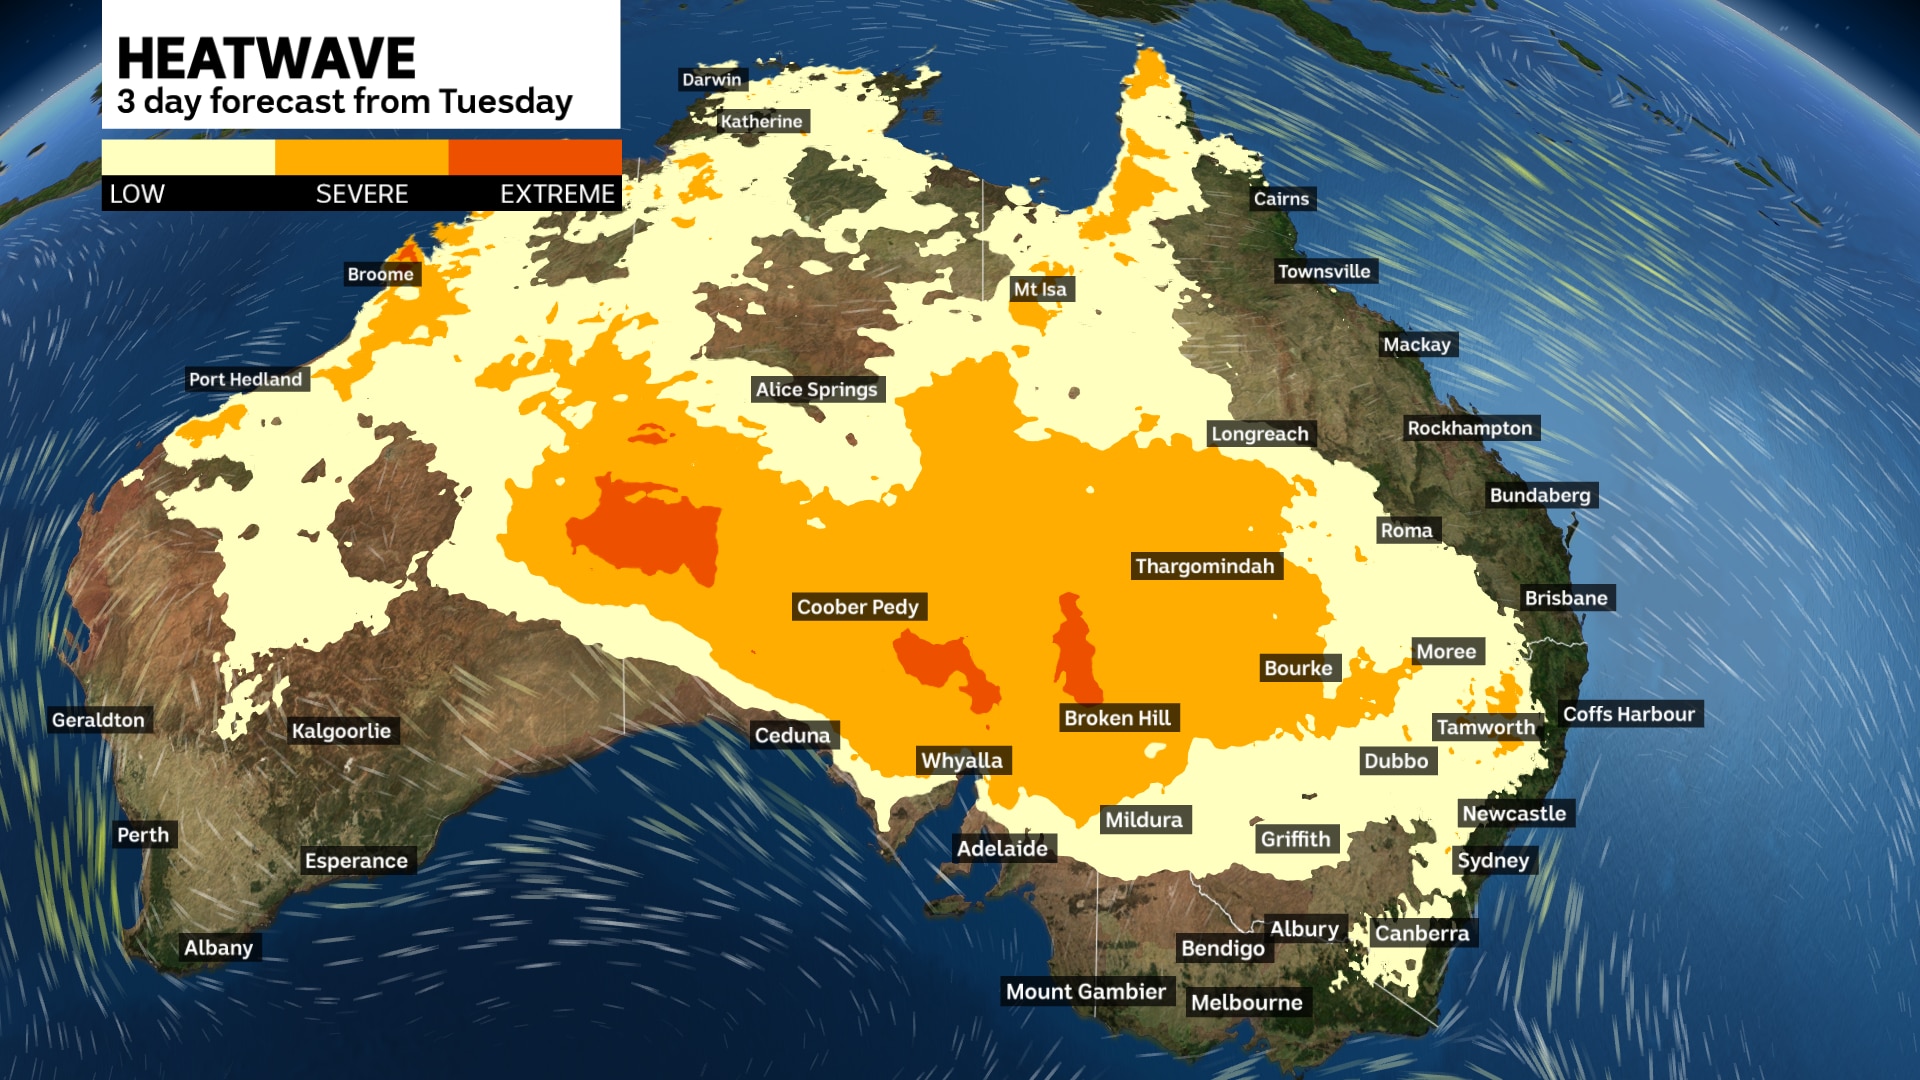 a graph map of australia showing forecast heatwave from Tuesday November 5